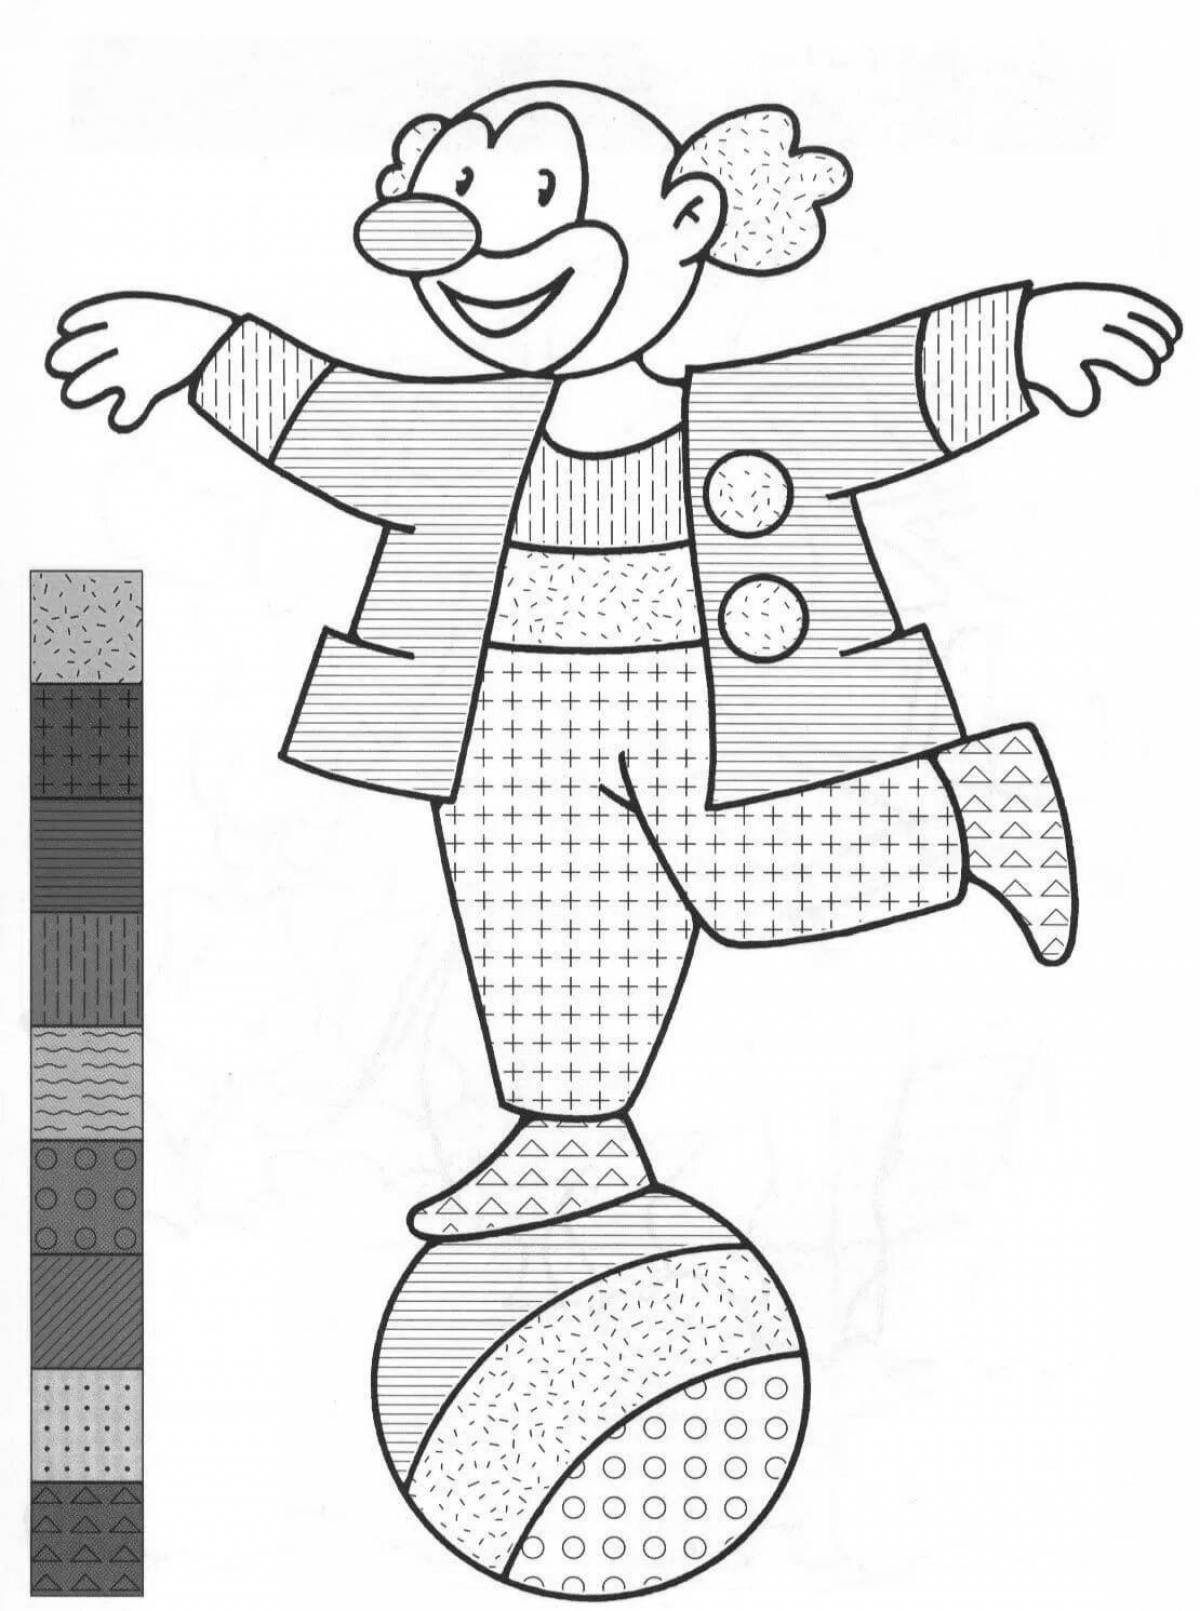 Outstanding clown visiting coloring page